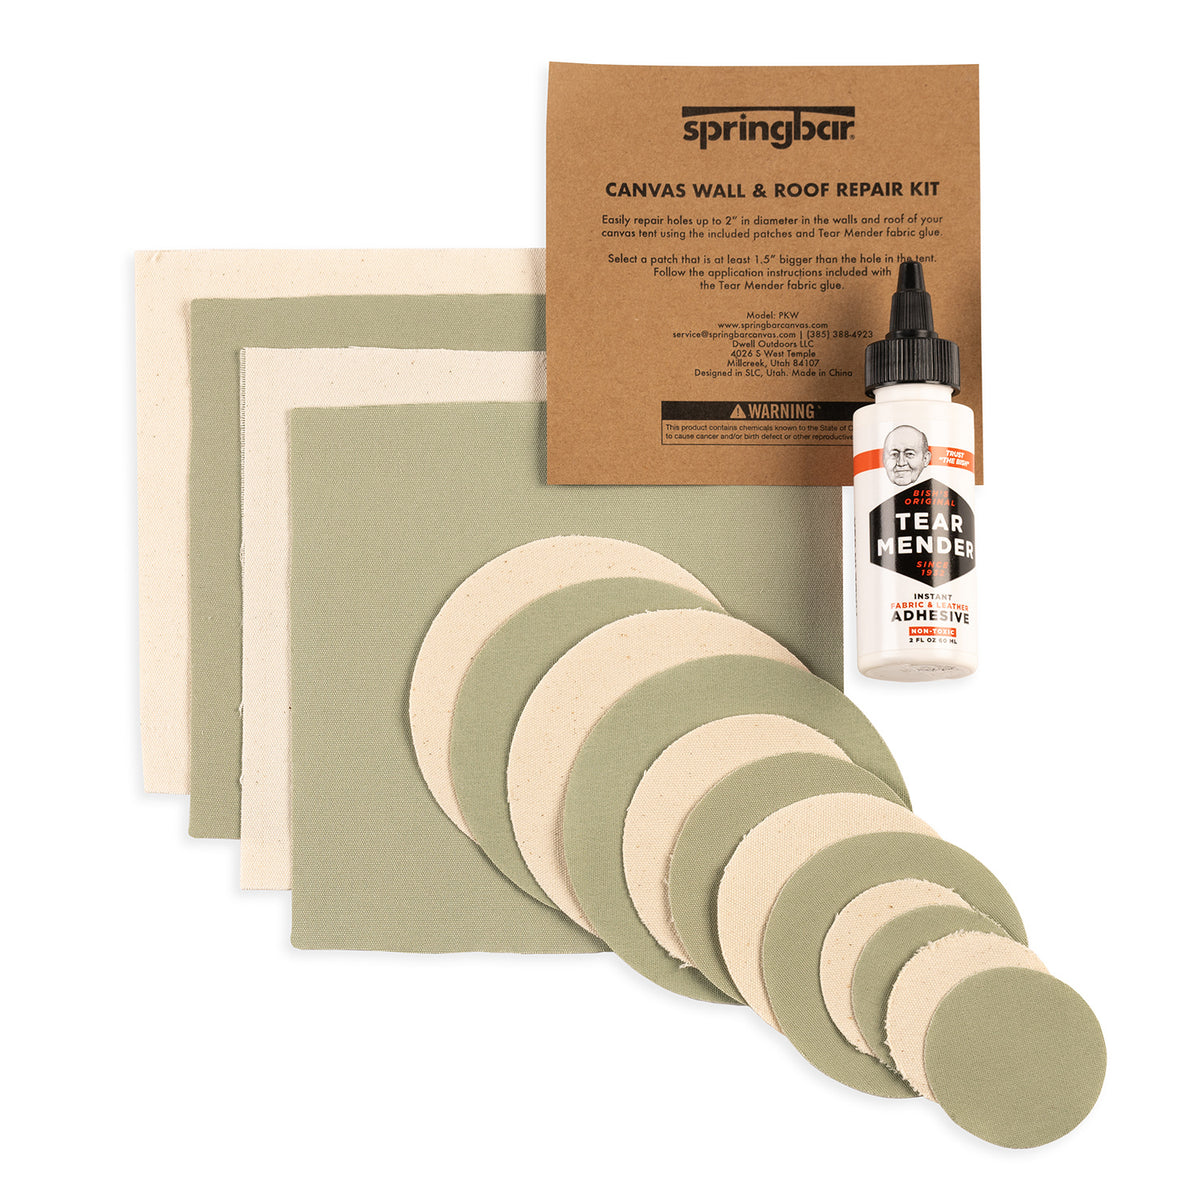 Productpreview: Leather Glue Repair Kit